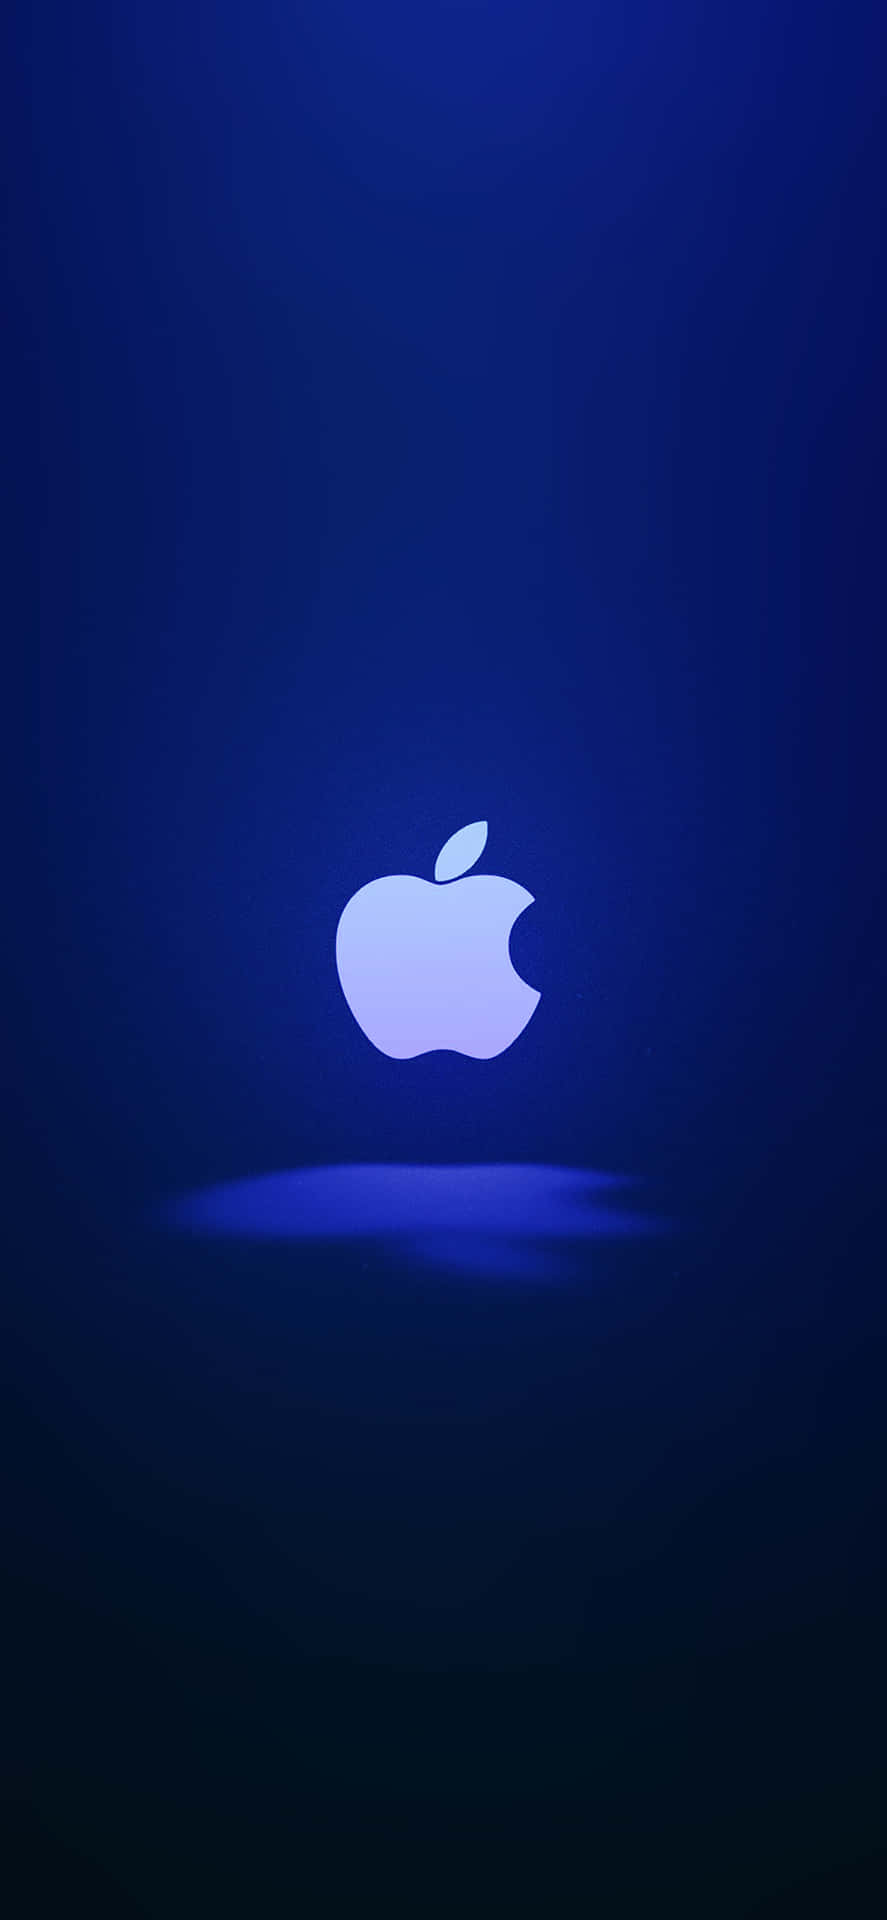 The iconic Apple Logo on an iPhone X Wallpaper